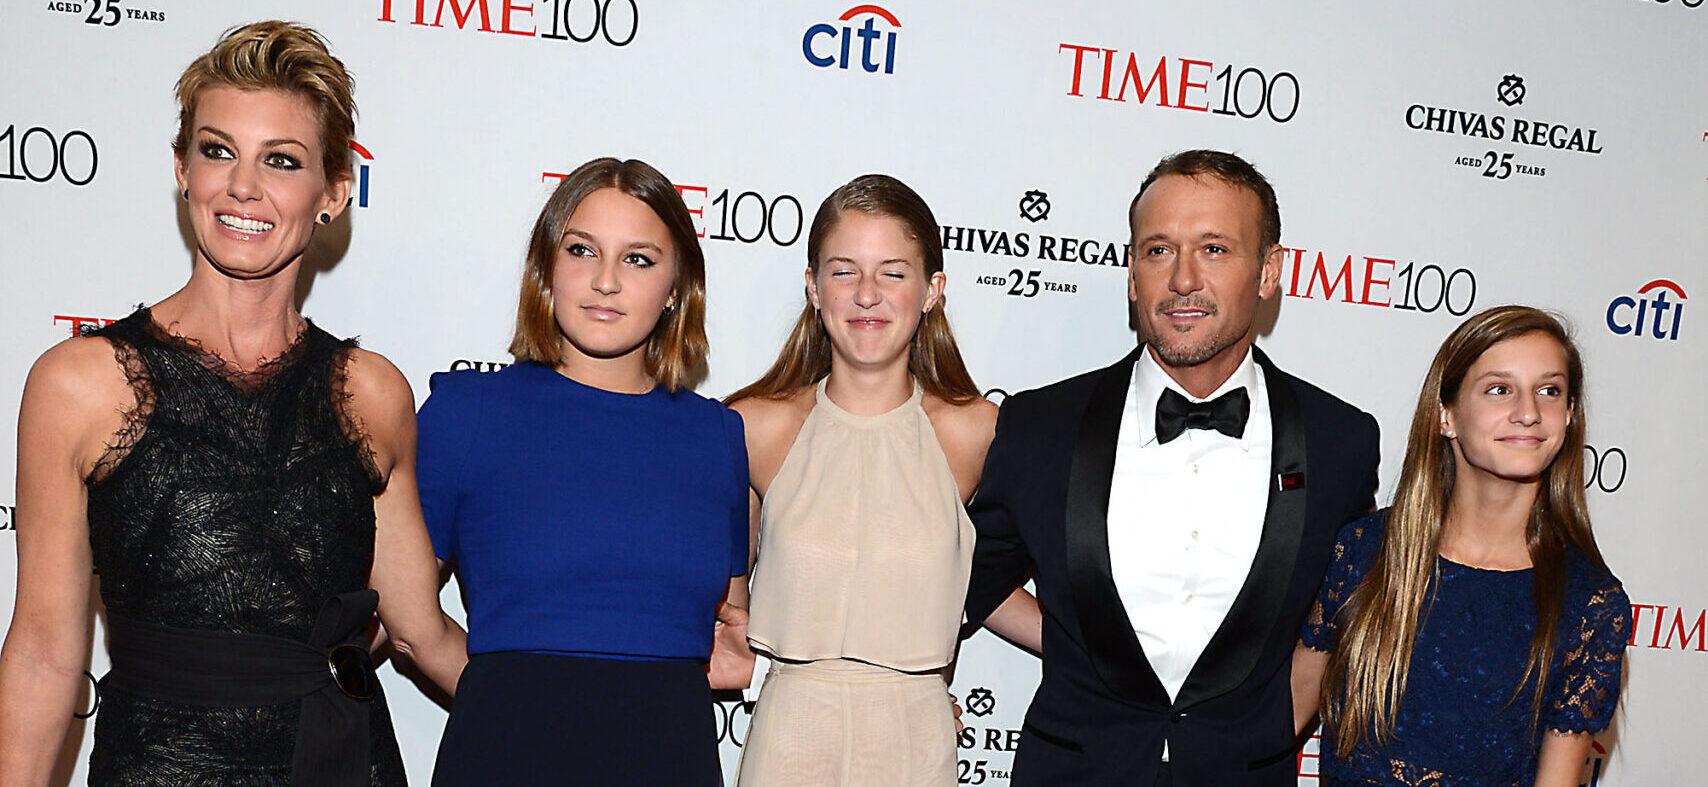 attends the TIME 100 Issue celebrating the 100 Most Influential People in the World on April 21, 2015